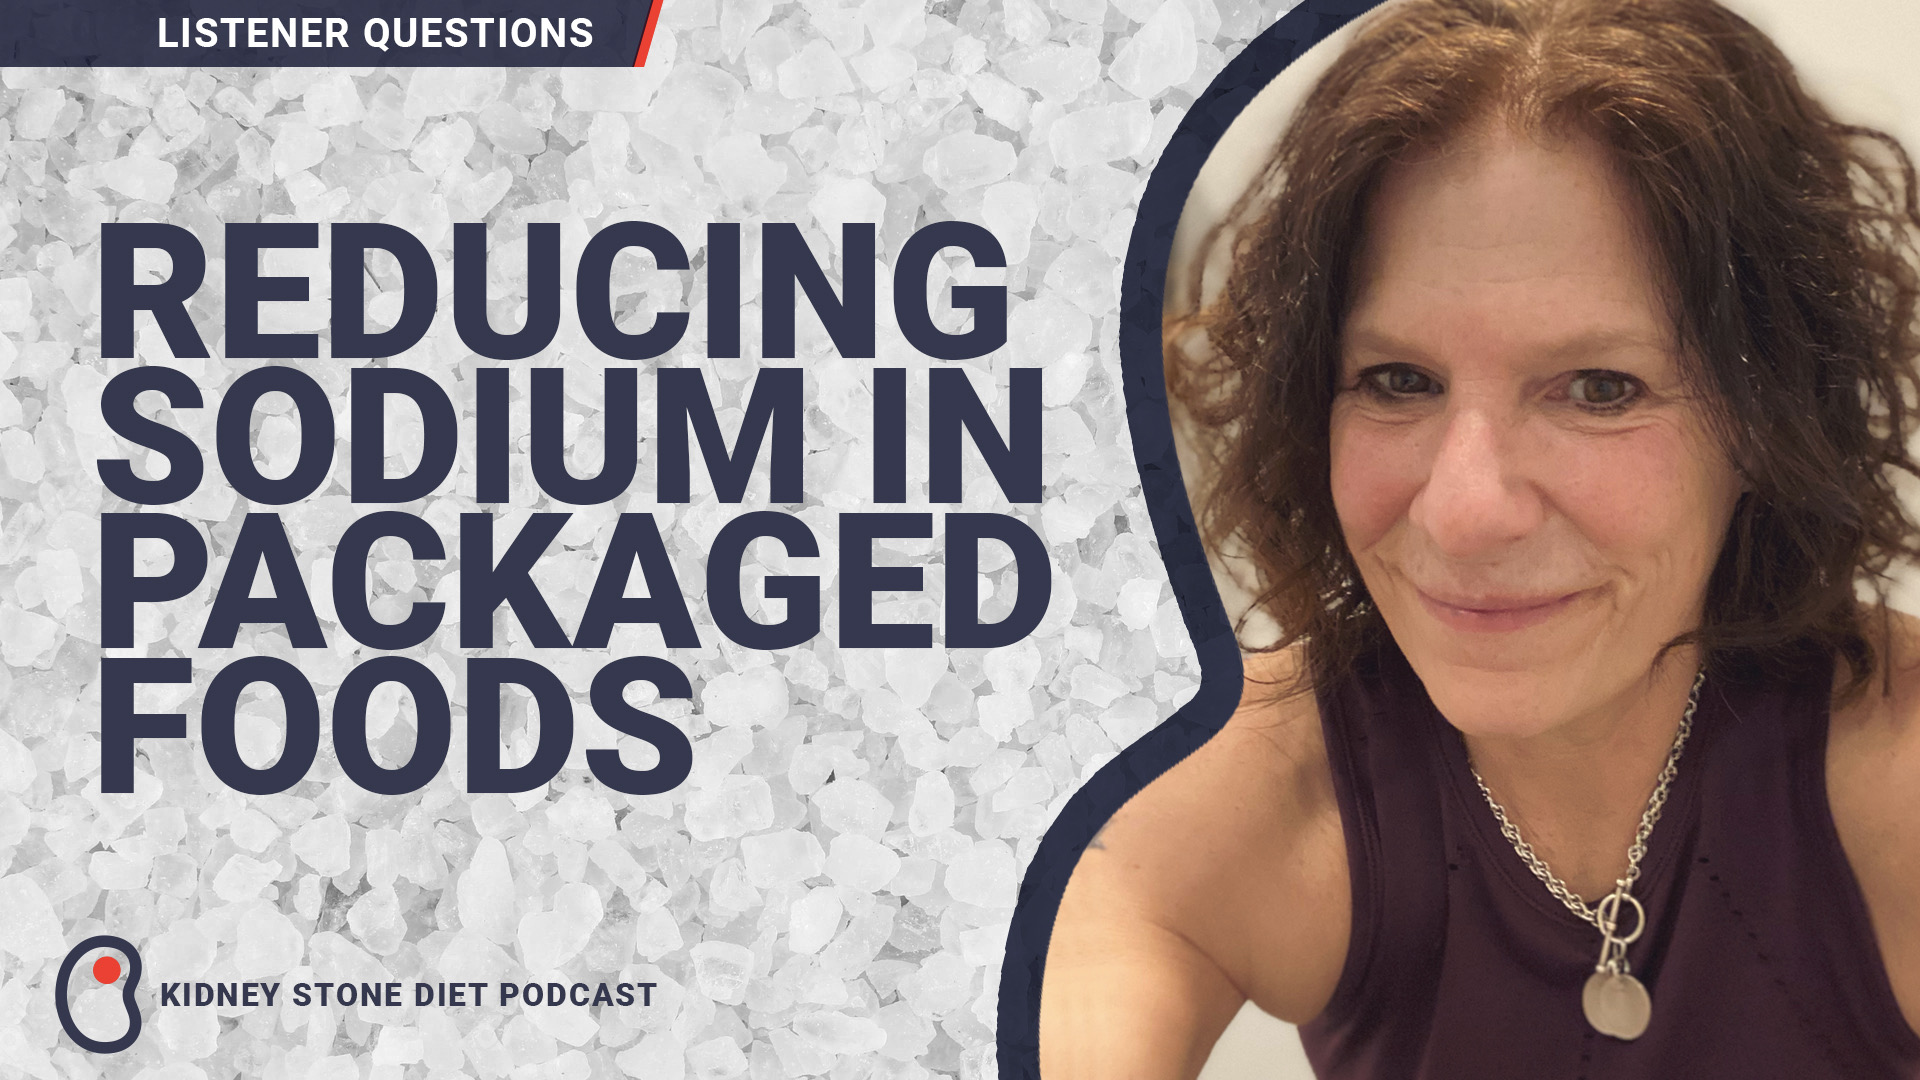 Reducing sodium in packaged foods - Kidney Stone Diet with Jill Harris ...